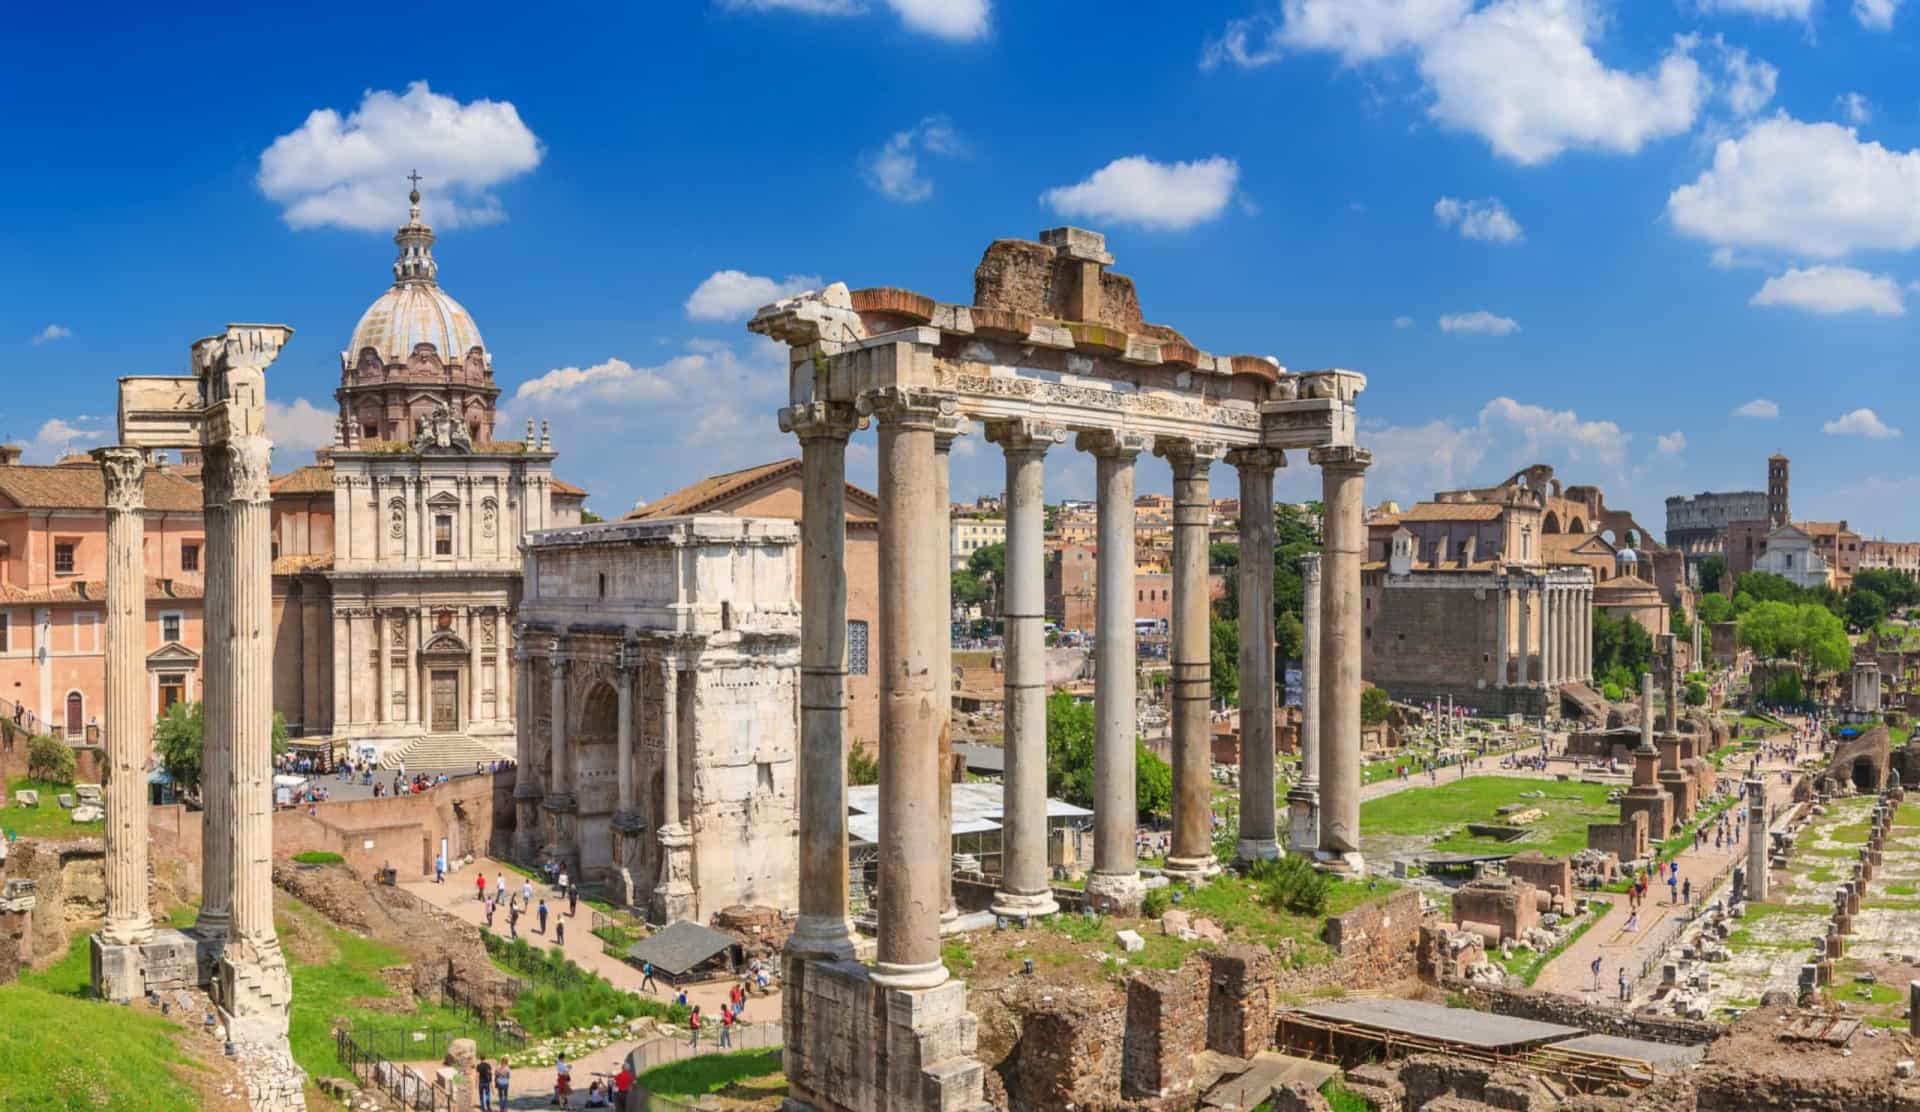 <p>Rome was founded in 753 BCE and is one of the oldest continuously-occupied cities in Europe. Its rare and precious landmarks include the mighty Colosseum and the Roman Forum (pictured).</p>